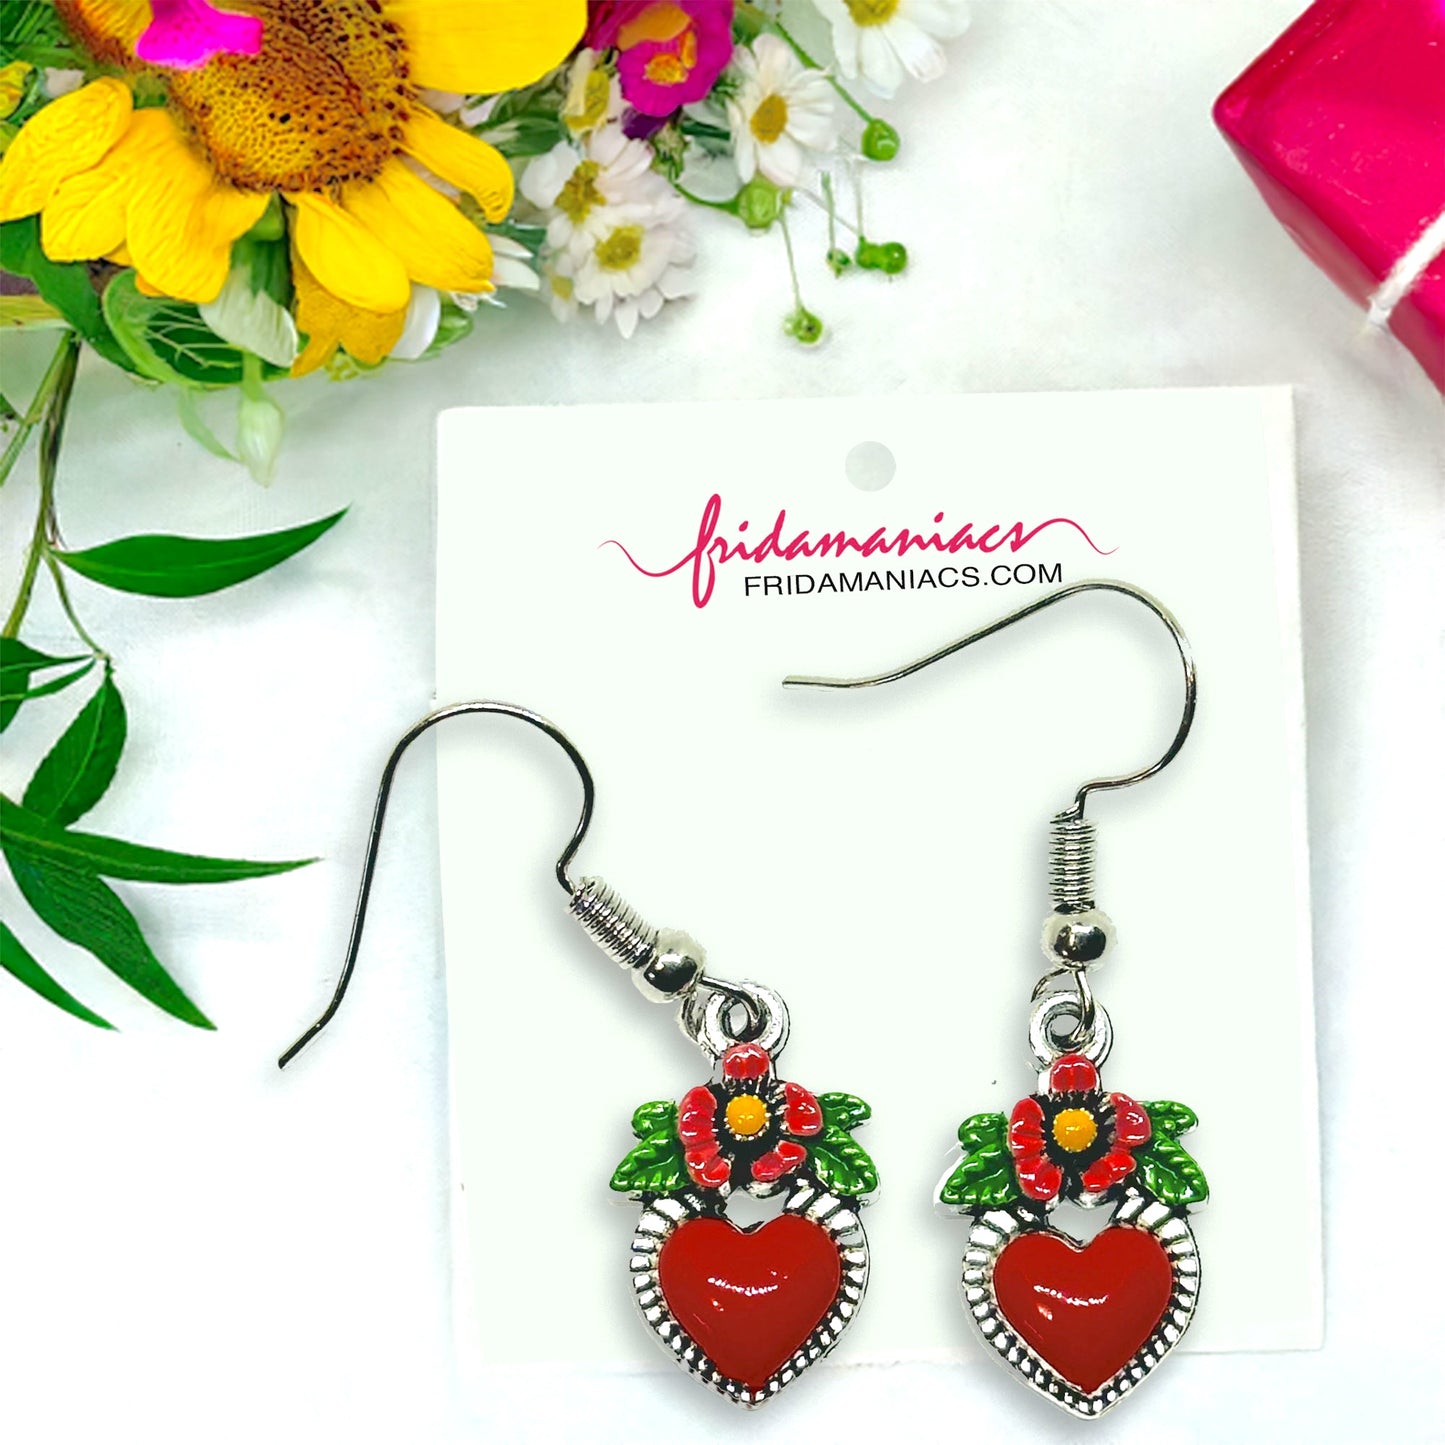 Flowered heart enamel earrings. Small red heart with pink flowers with yellow center and green leaves. Gorgeous Frida Kahlo inspired earrings. Mexican earrings. Mexican jewelry for girls and women. Drop and dangle.